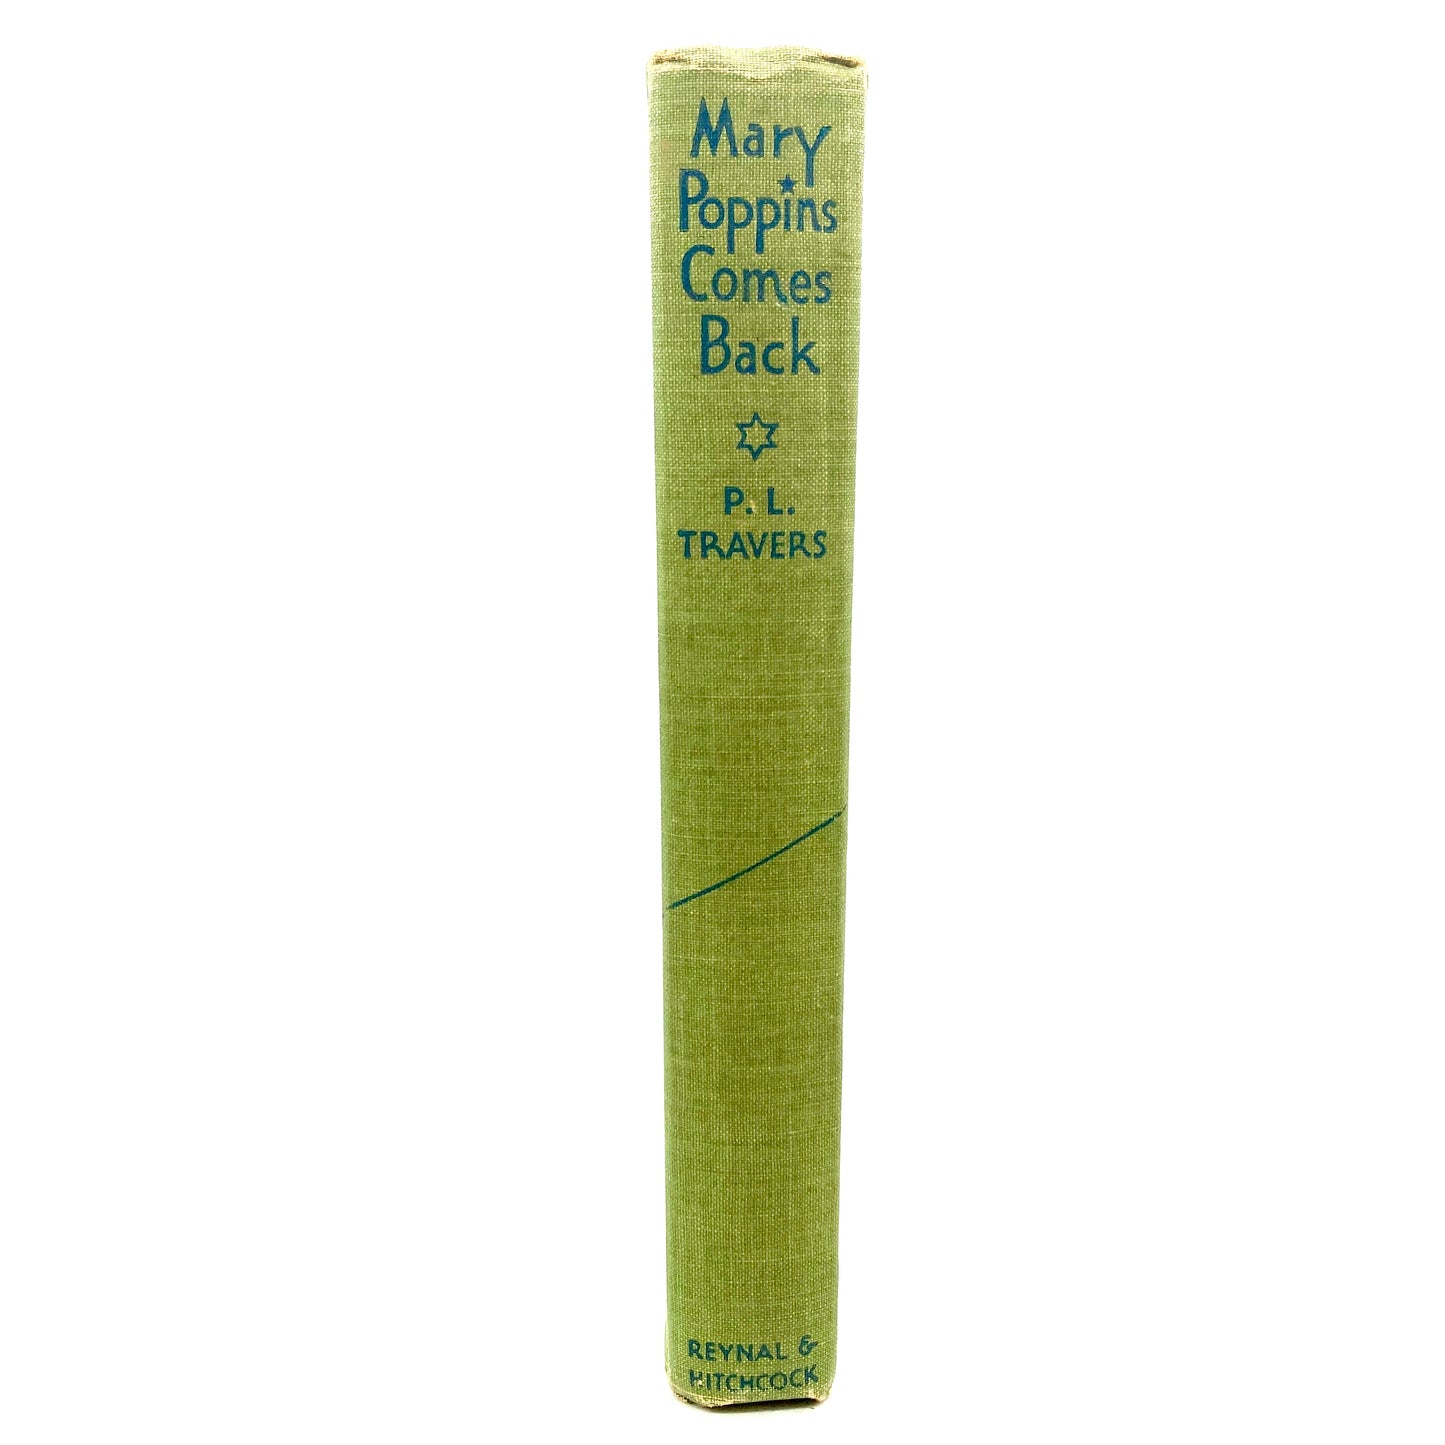 TRAVERS, P.L. "Mary Poppins Comes Back" [Reynal & Hitchcock, 1935] 1st Edition